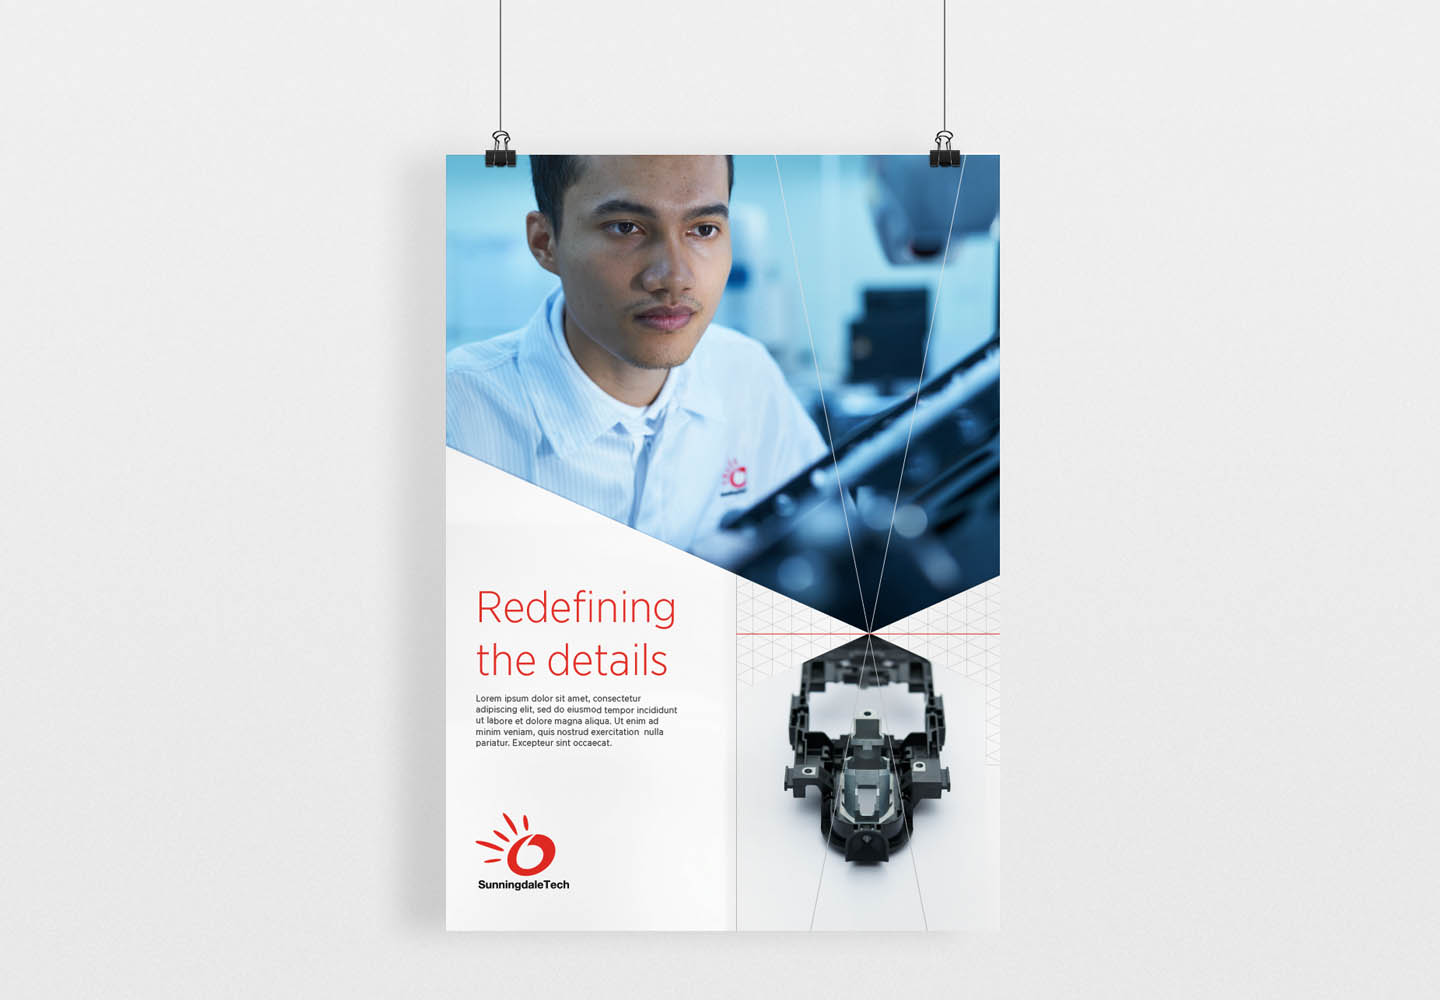 Brand Consultancy in Manufacturing Industry. Poster Design for Sunningdale Tech